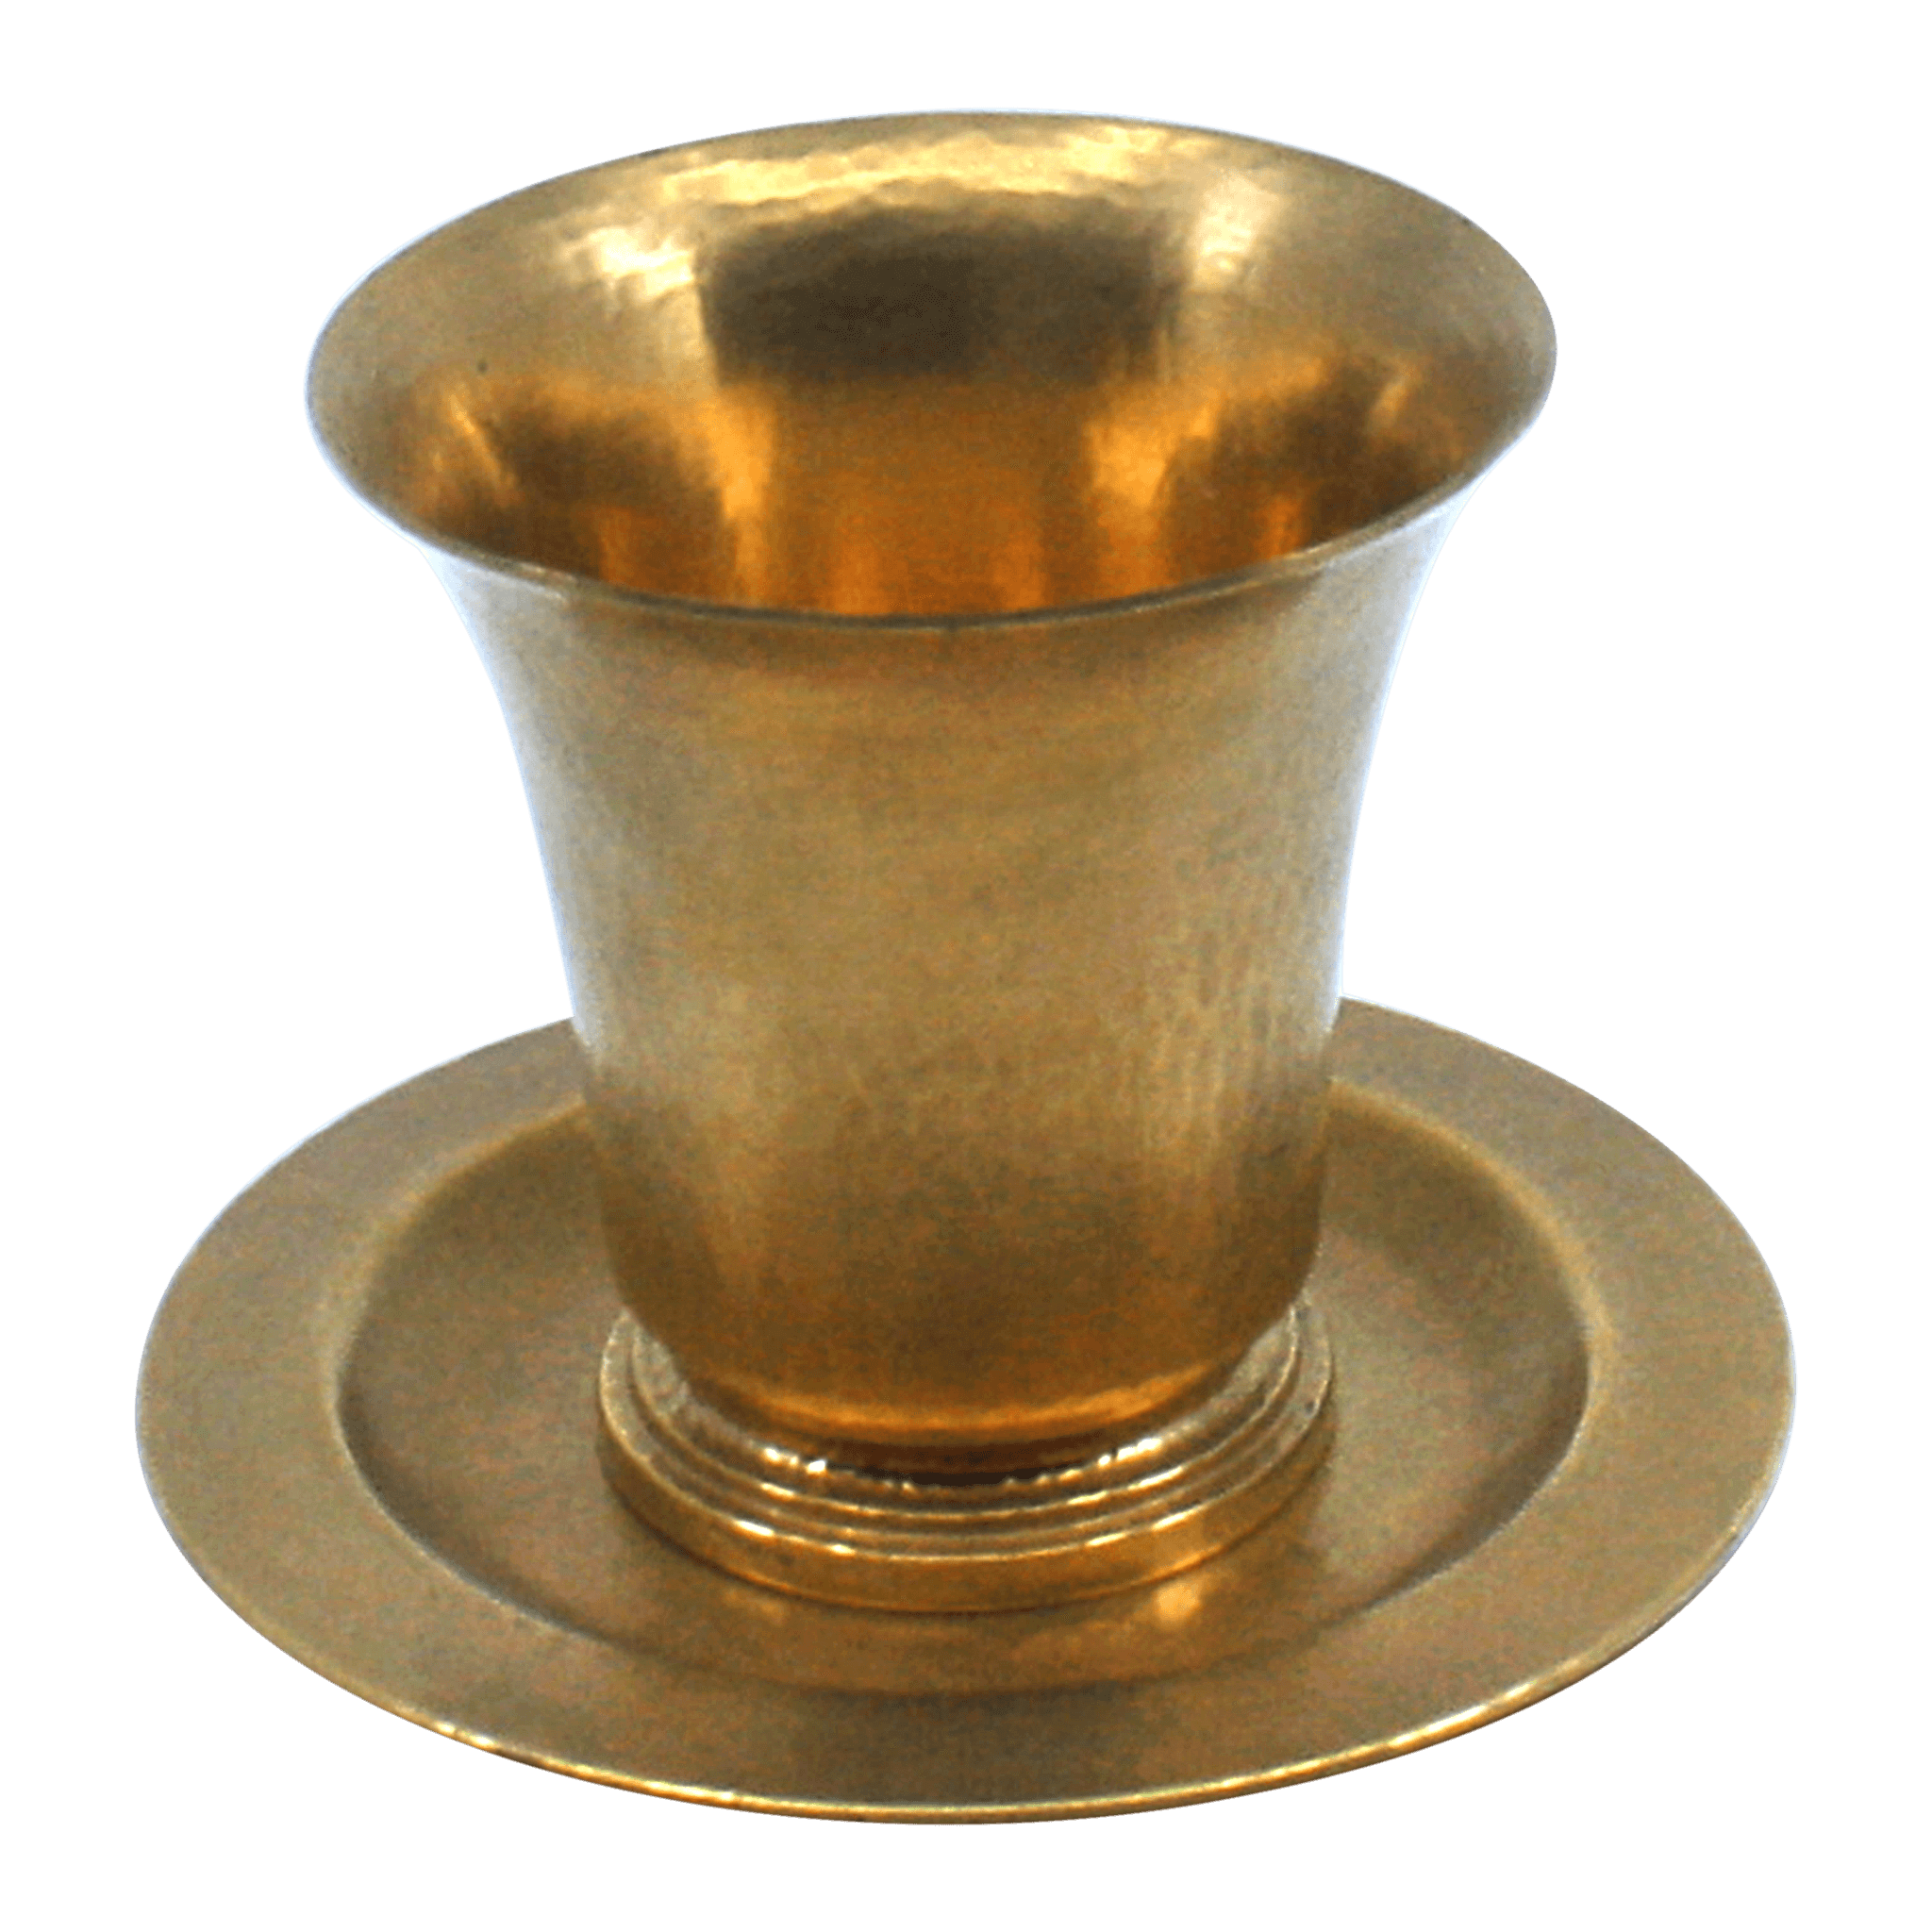 GOLD PLATED HAND HAMMERED STERLING SILVER BIG CUP AND TRAY at $1380.00 - Piece By Zion Hadad